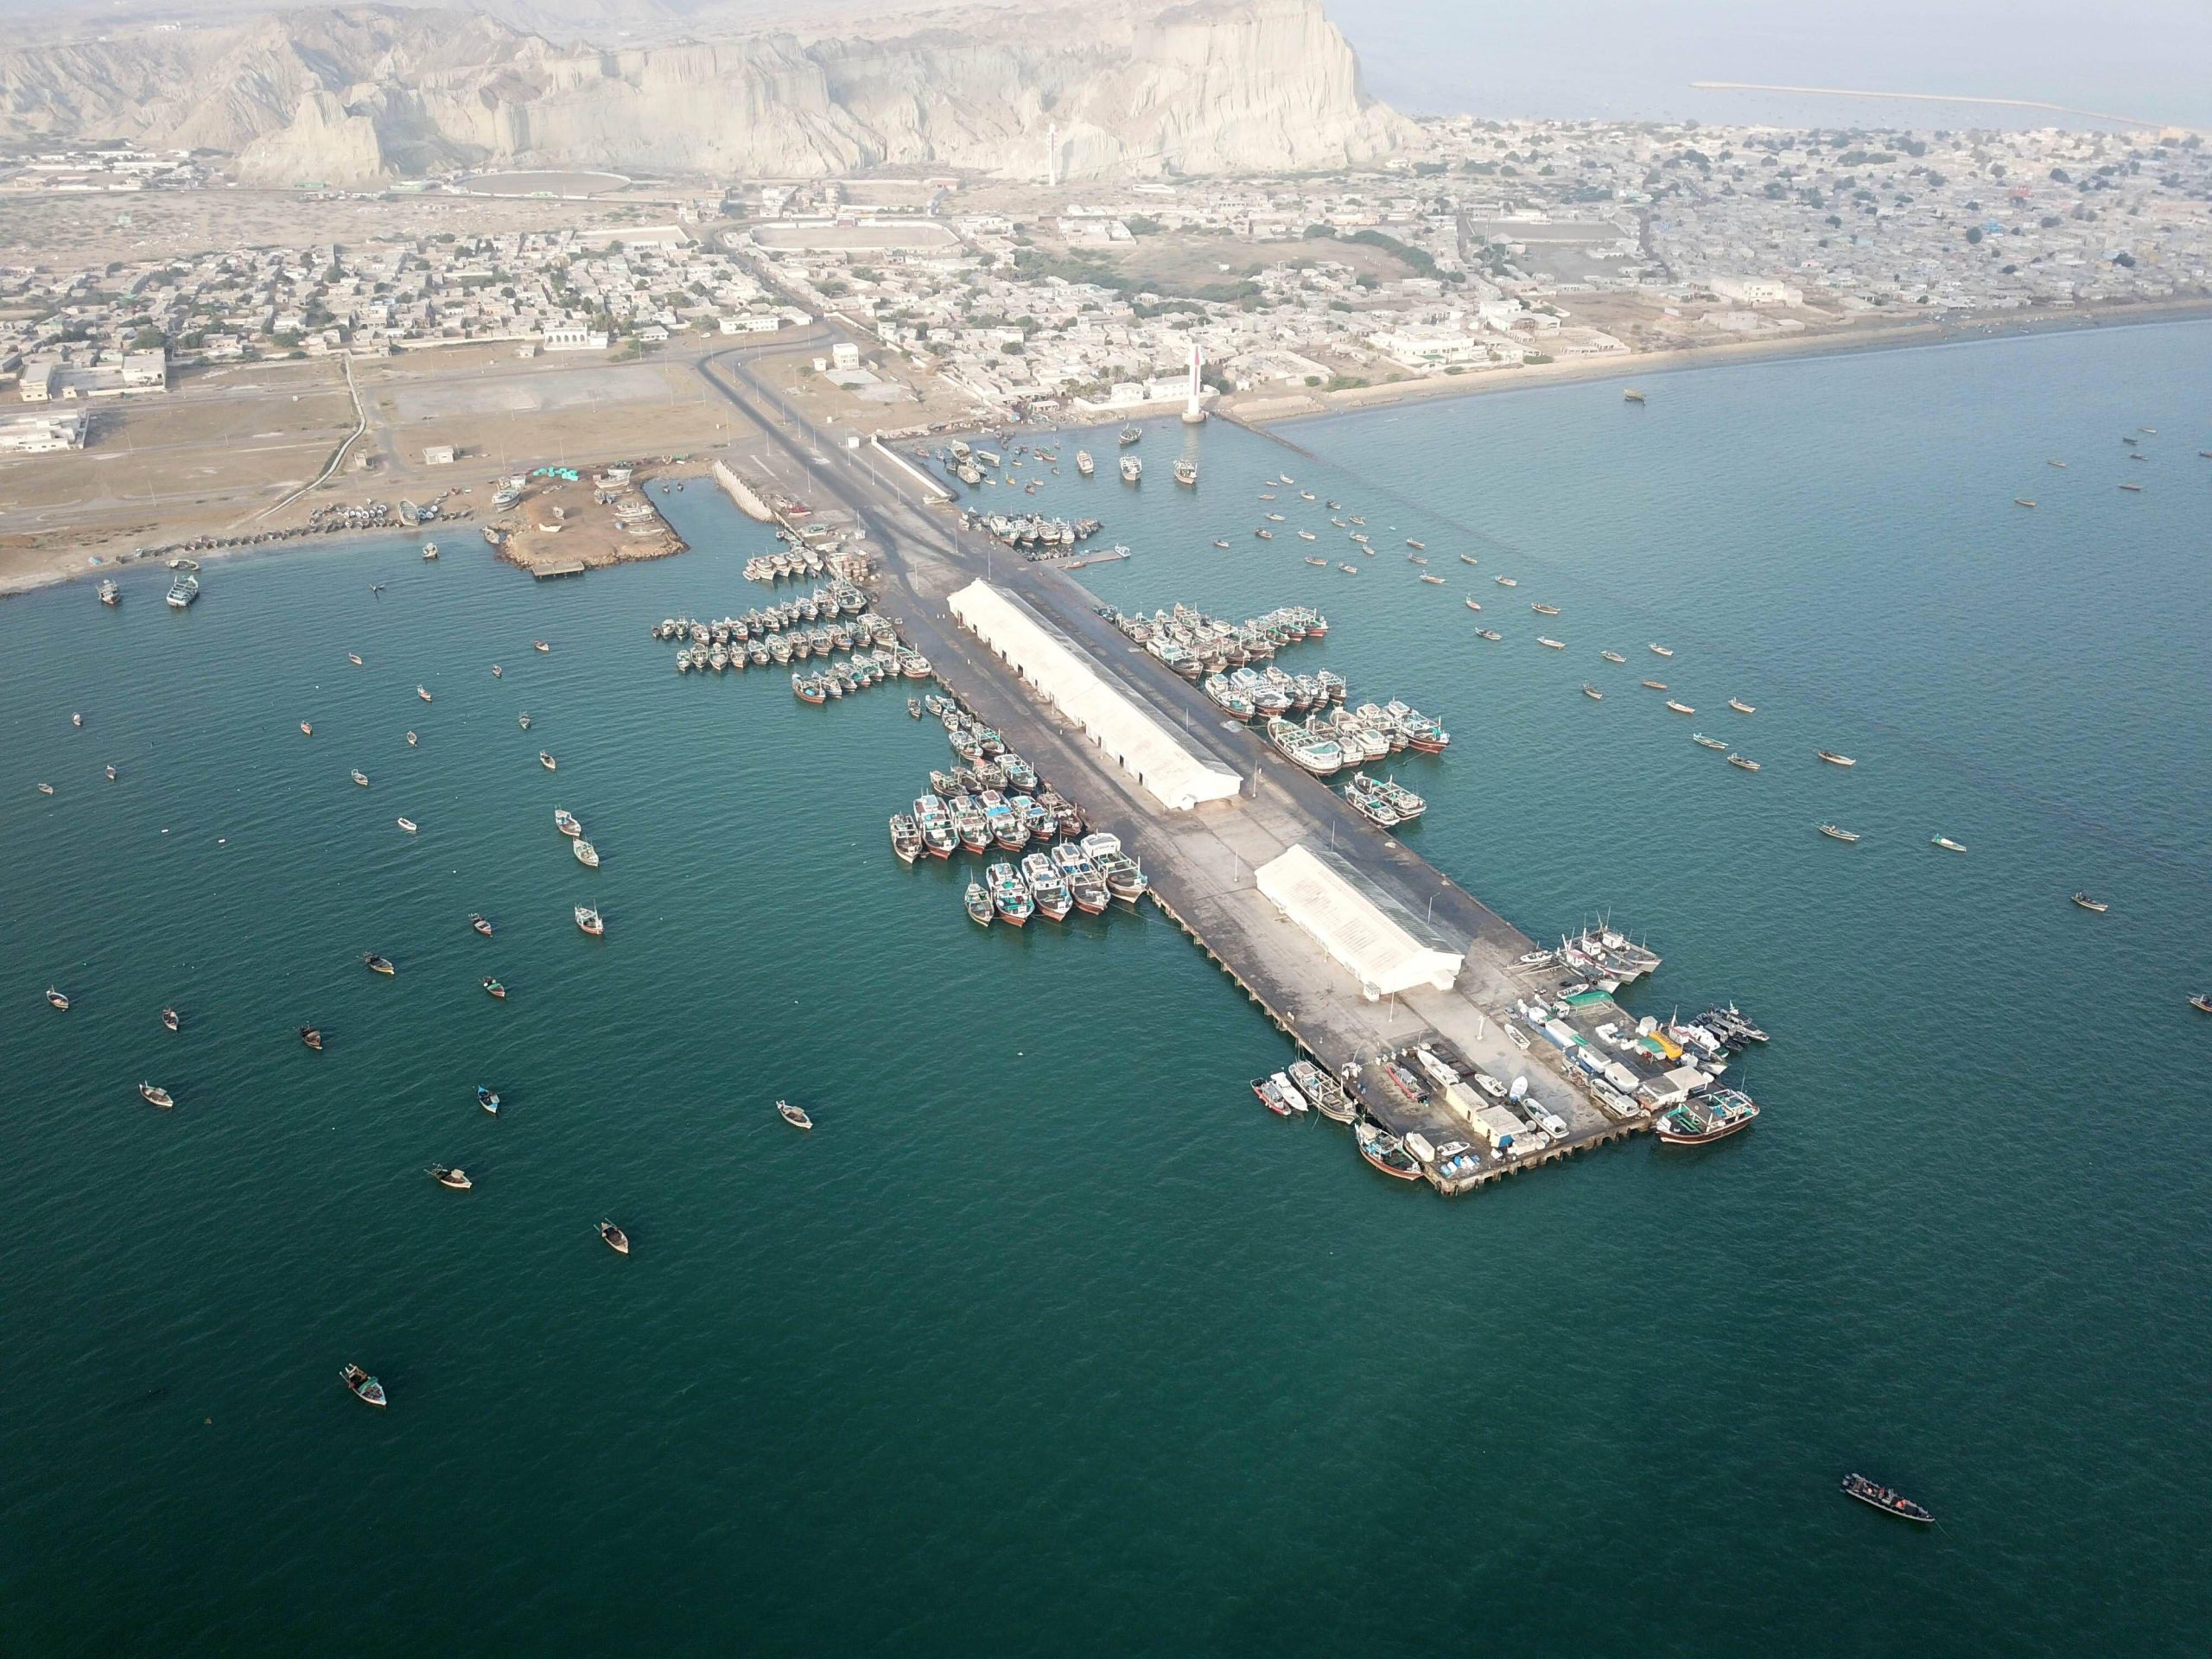 <p>An aerial view of Gwadar port shows fishing boats in the bay in southwest Pakistan. (Image: Ahmad Kamal / Alamy)</p>